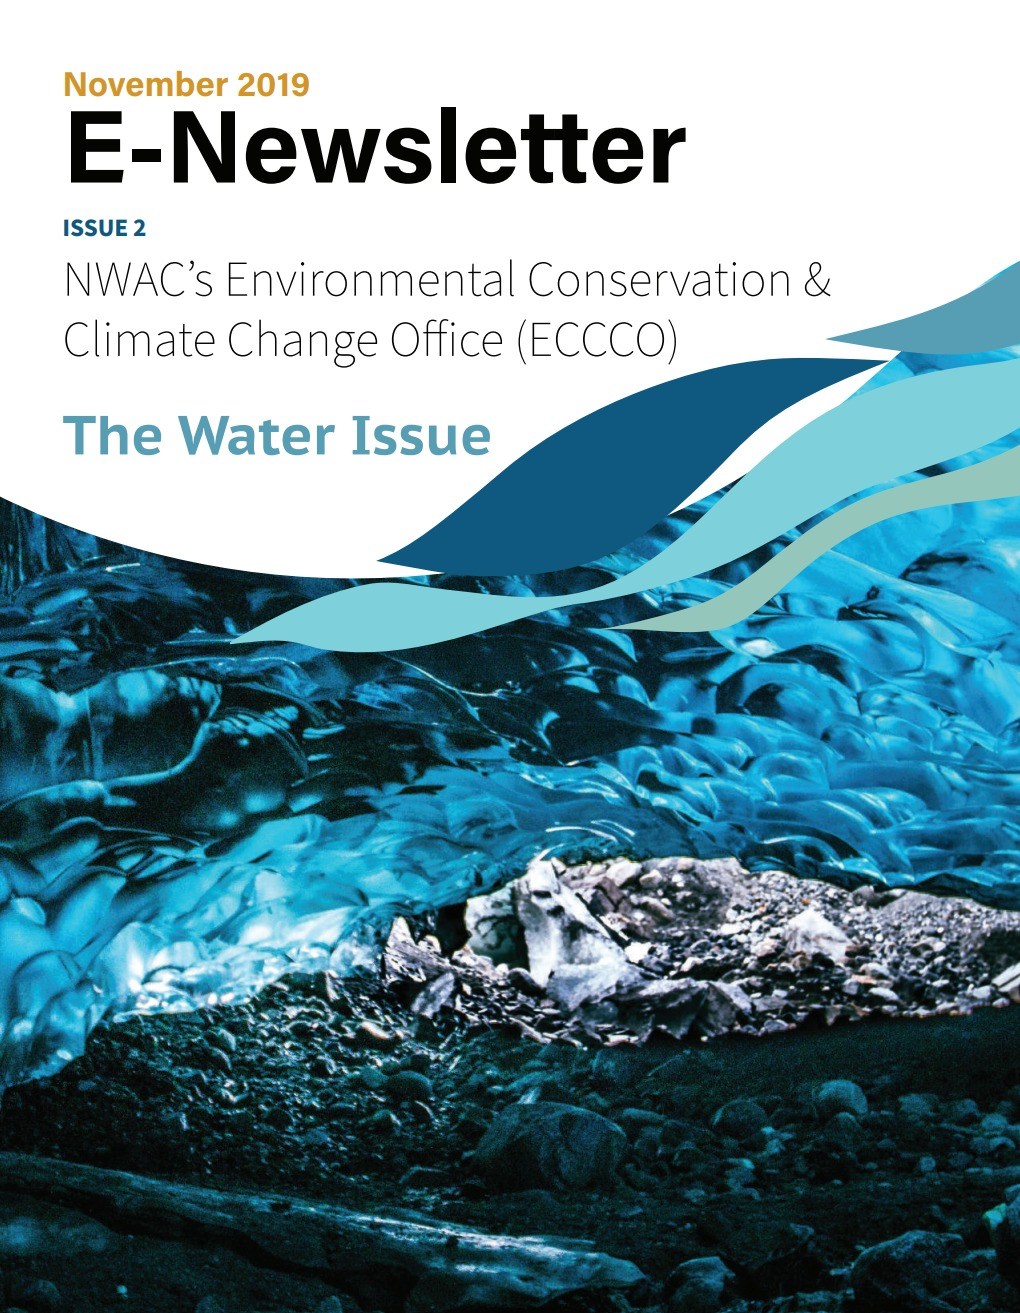 November Edition: The Water Issue